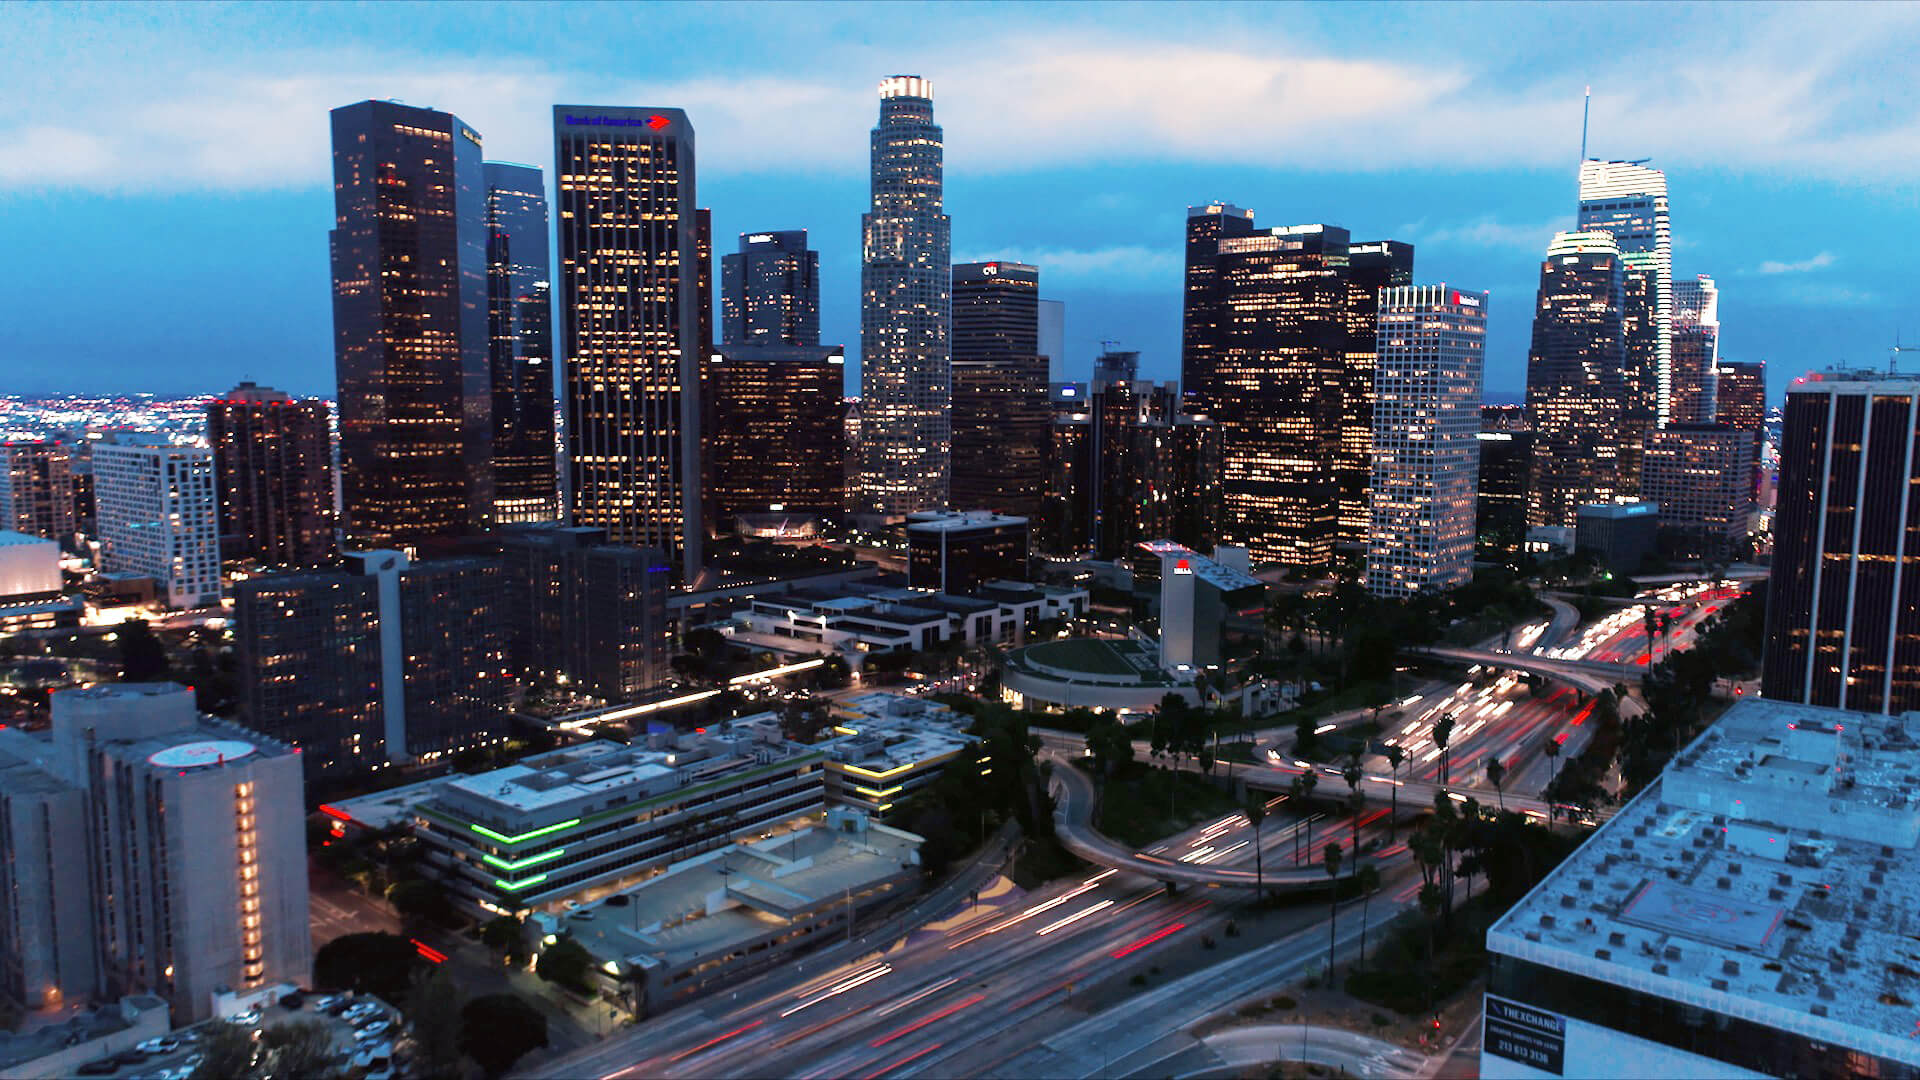 The skyline of Los Angeles at night, lit using renewable energy.